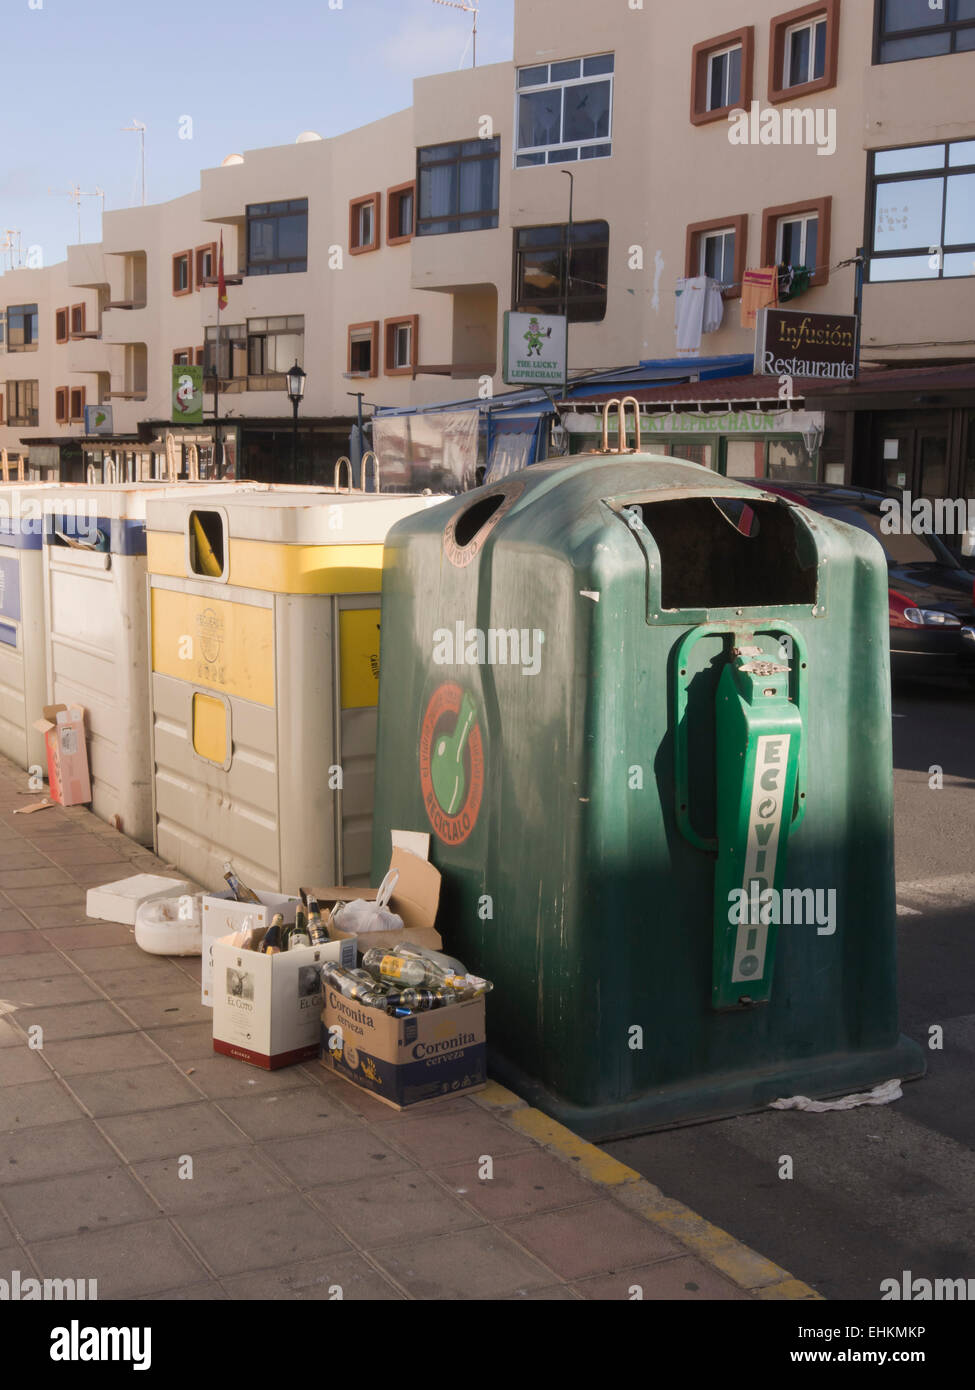 Waste collection and recycling in Corralejo Fuerteventura, Canary islands Spain many tourists implies large containers Stock Photo